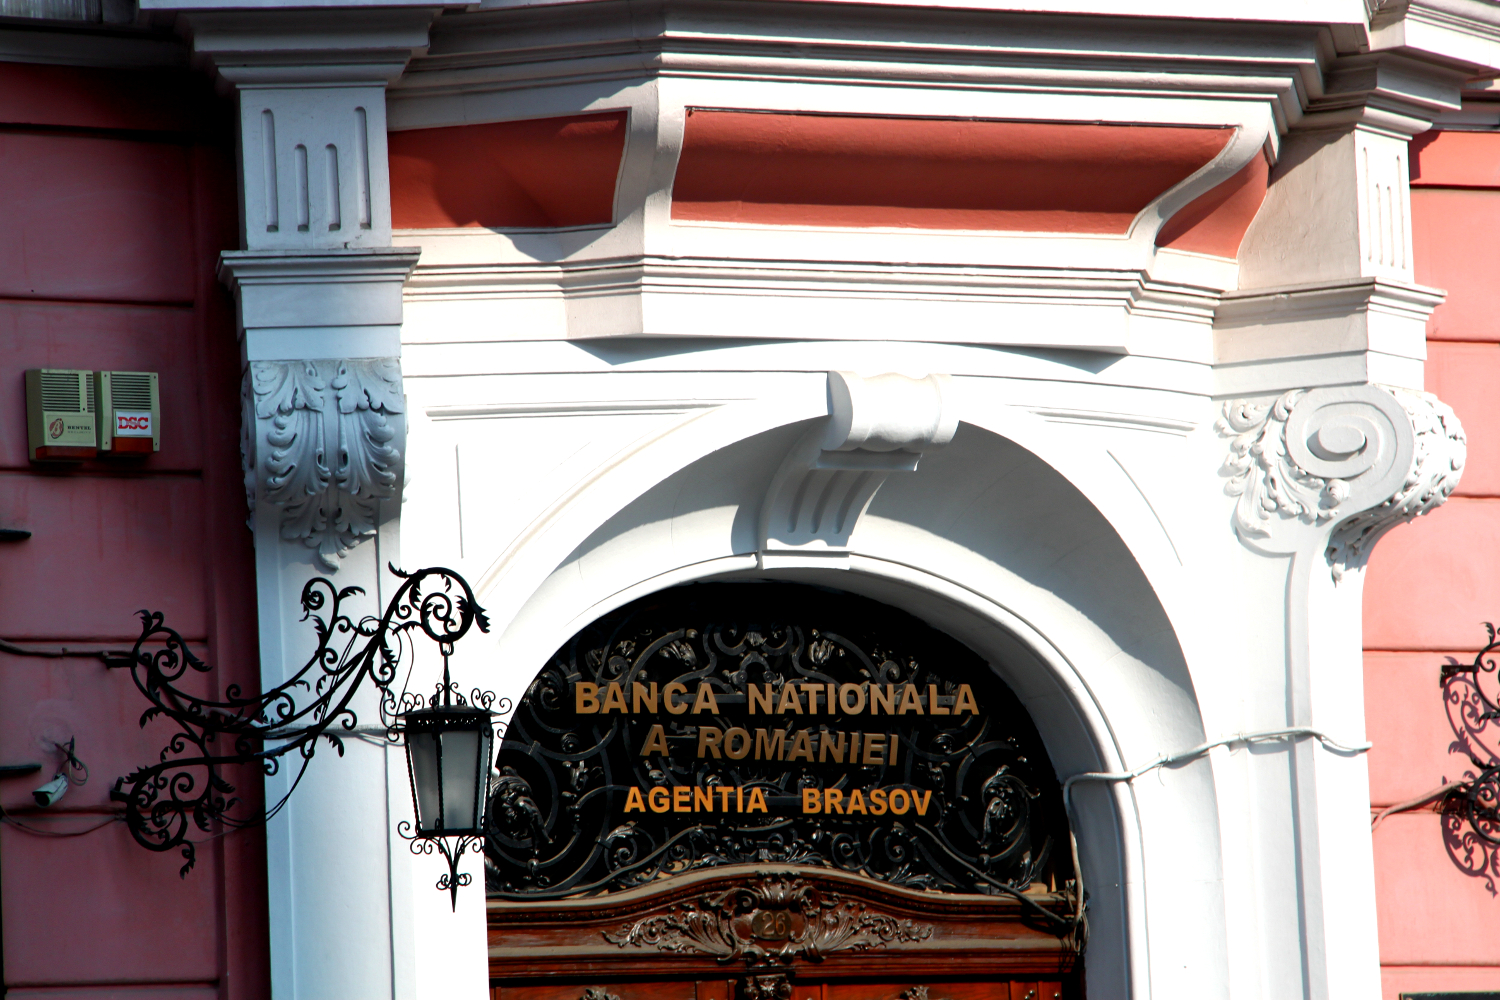 The National Bank of Romania’s branch in Brasov